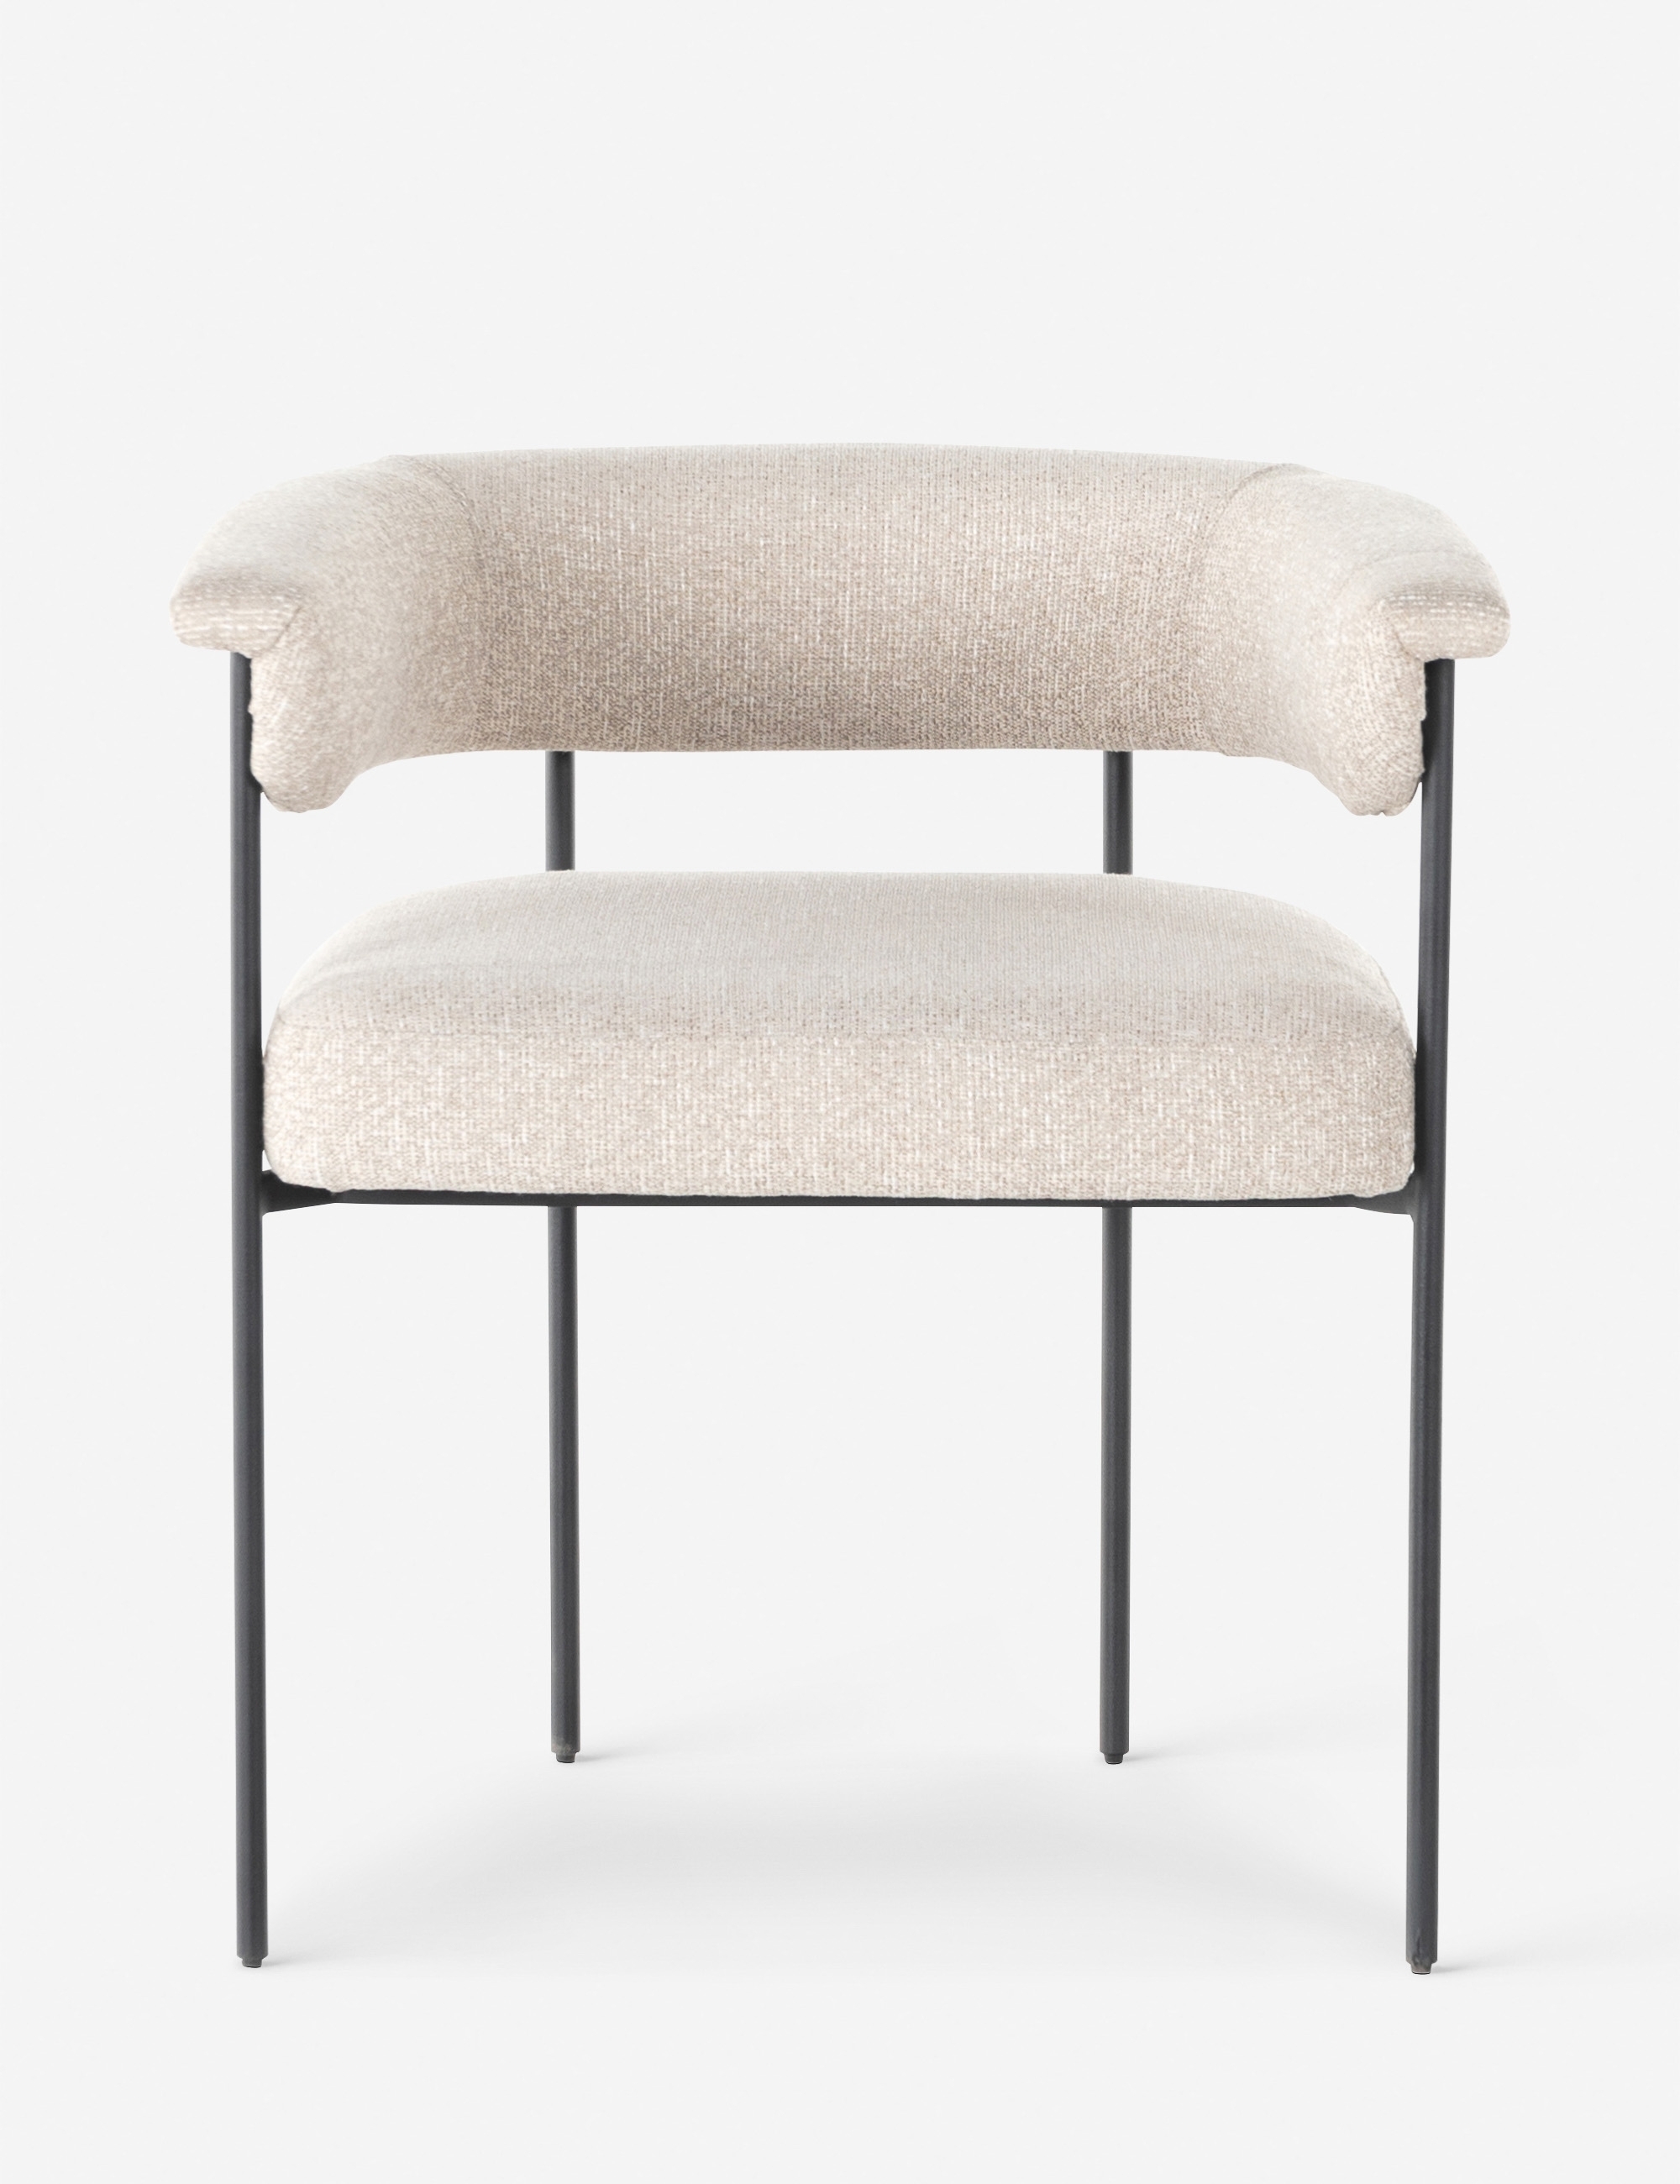 Kyleigh Dining Chair - Image 1